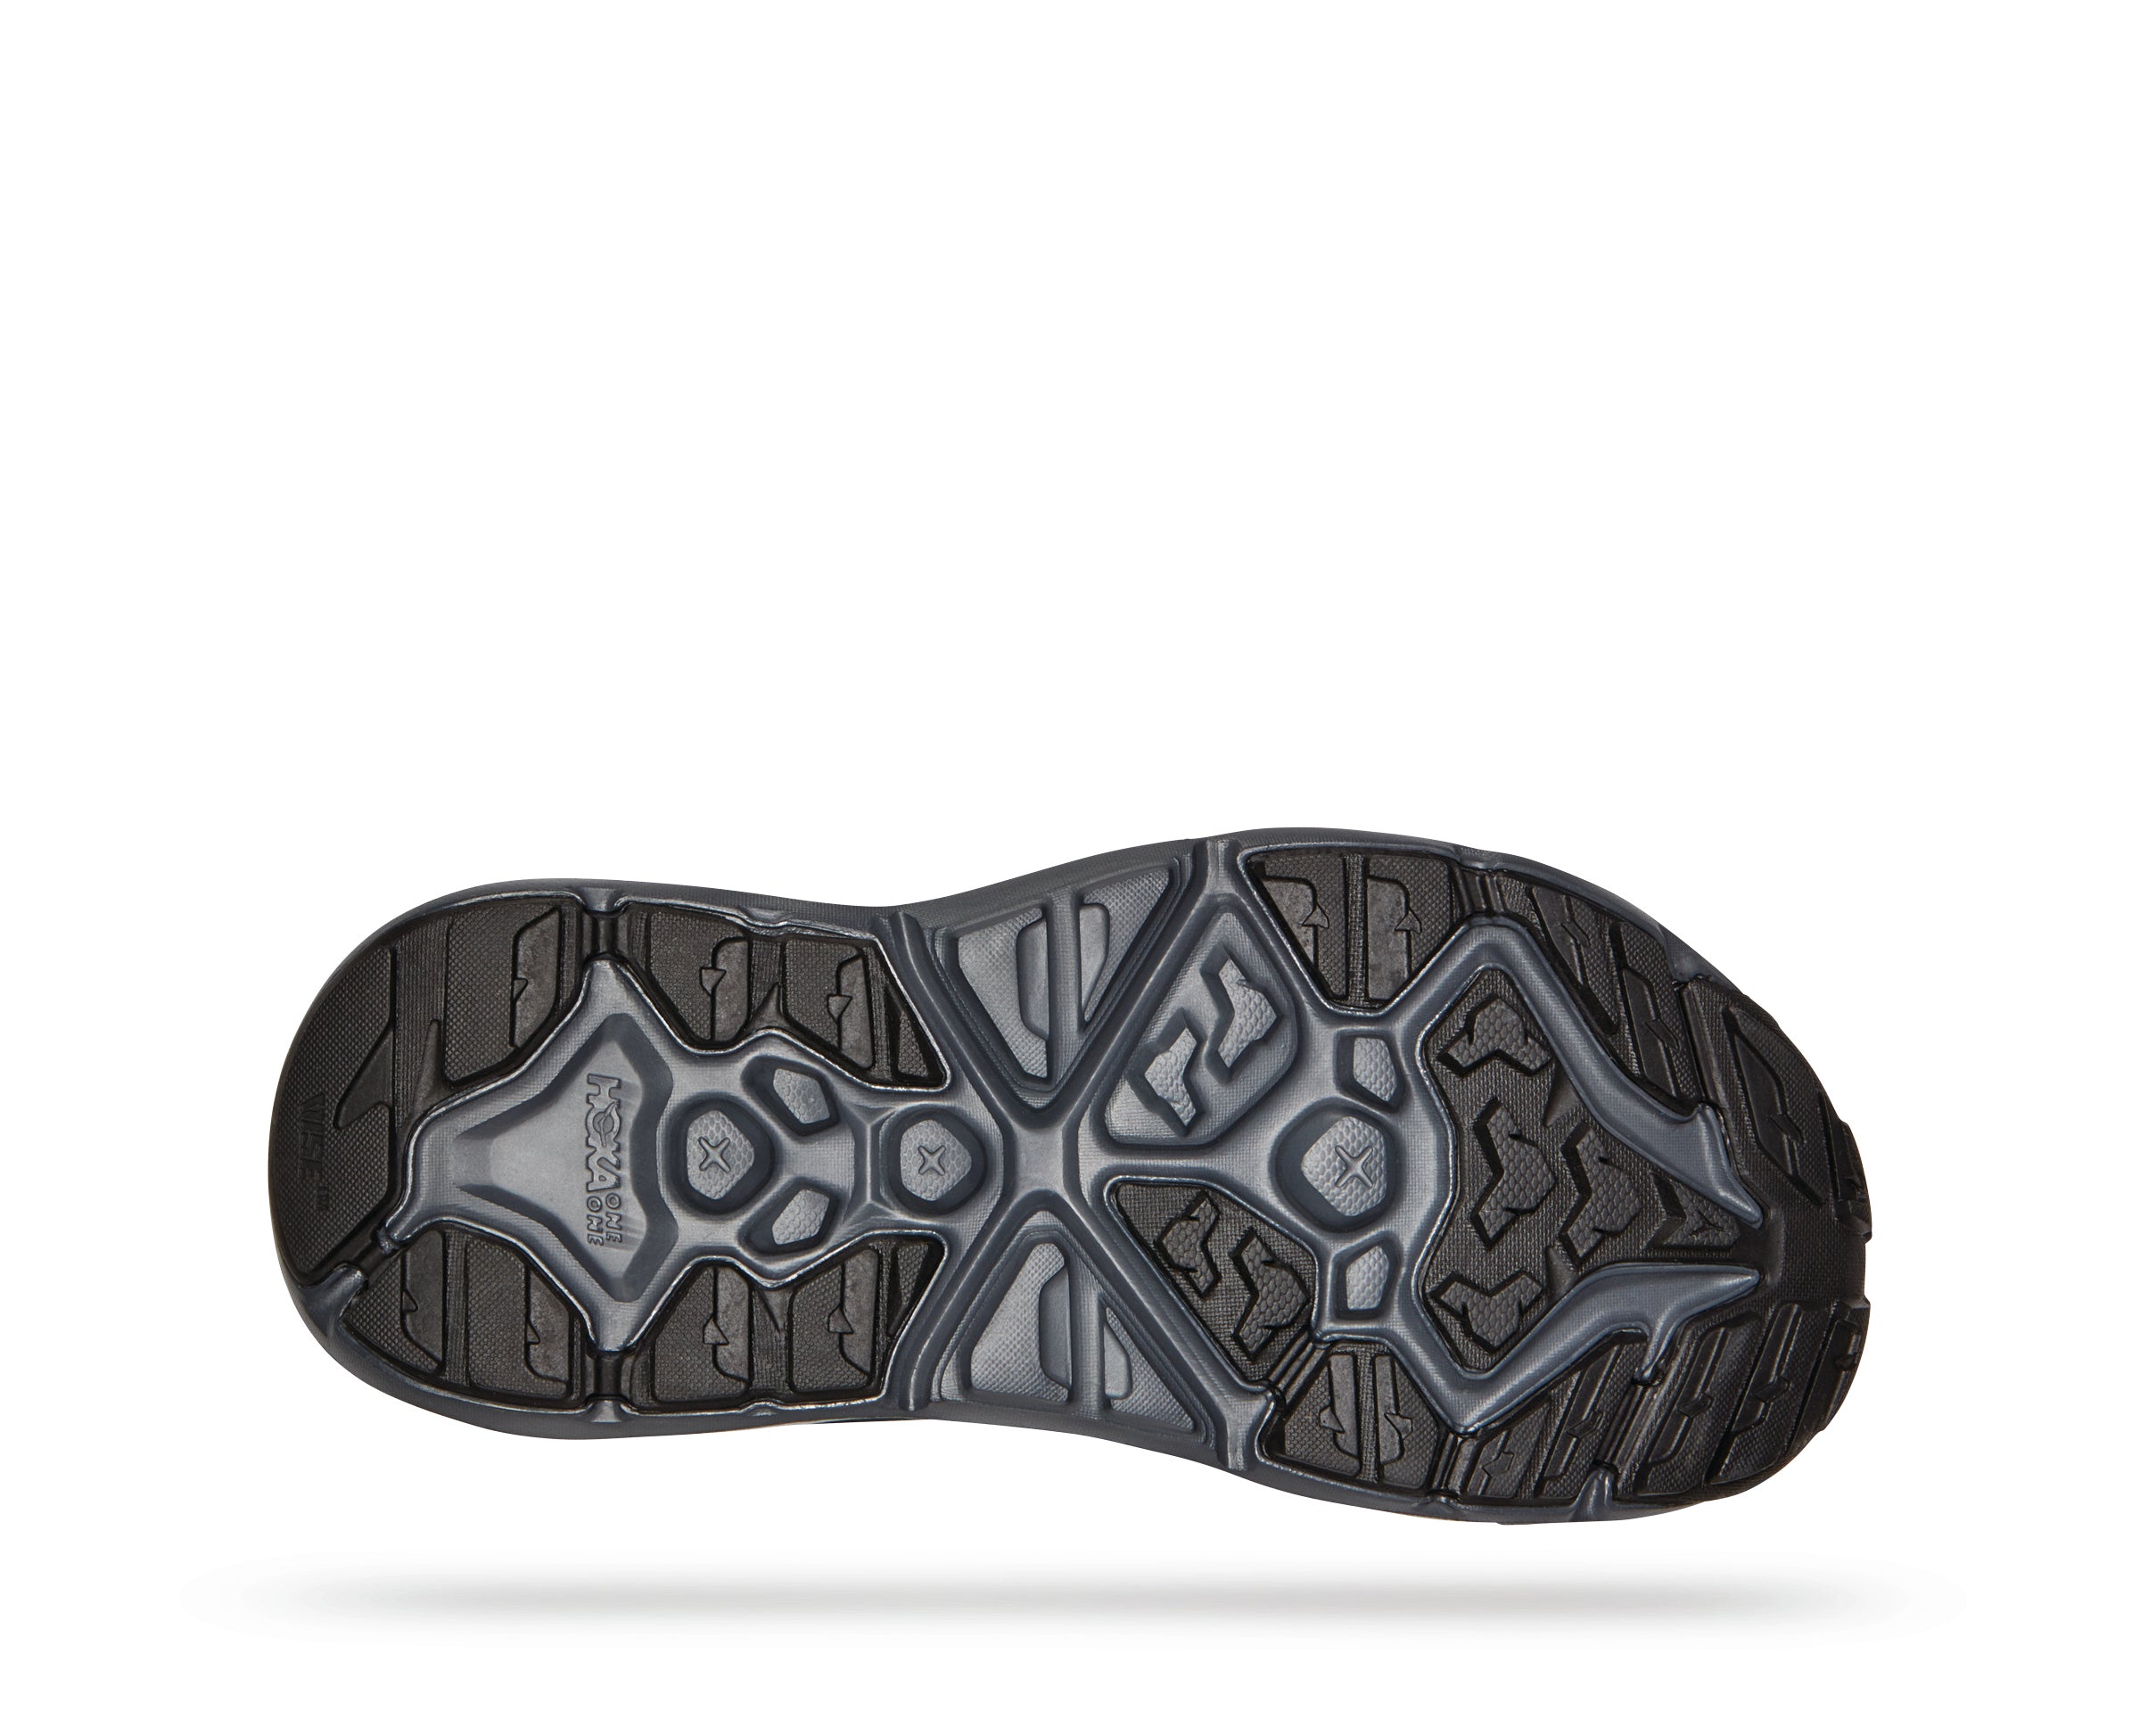 Bottom (outer sole) view of the Men's Hopara sandal by HOKA in Black